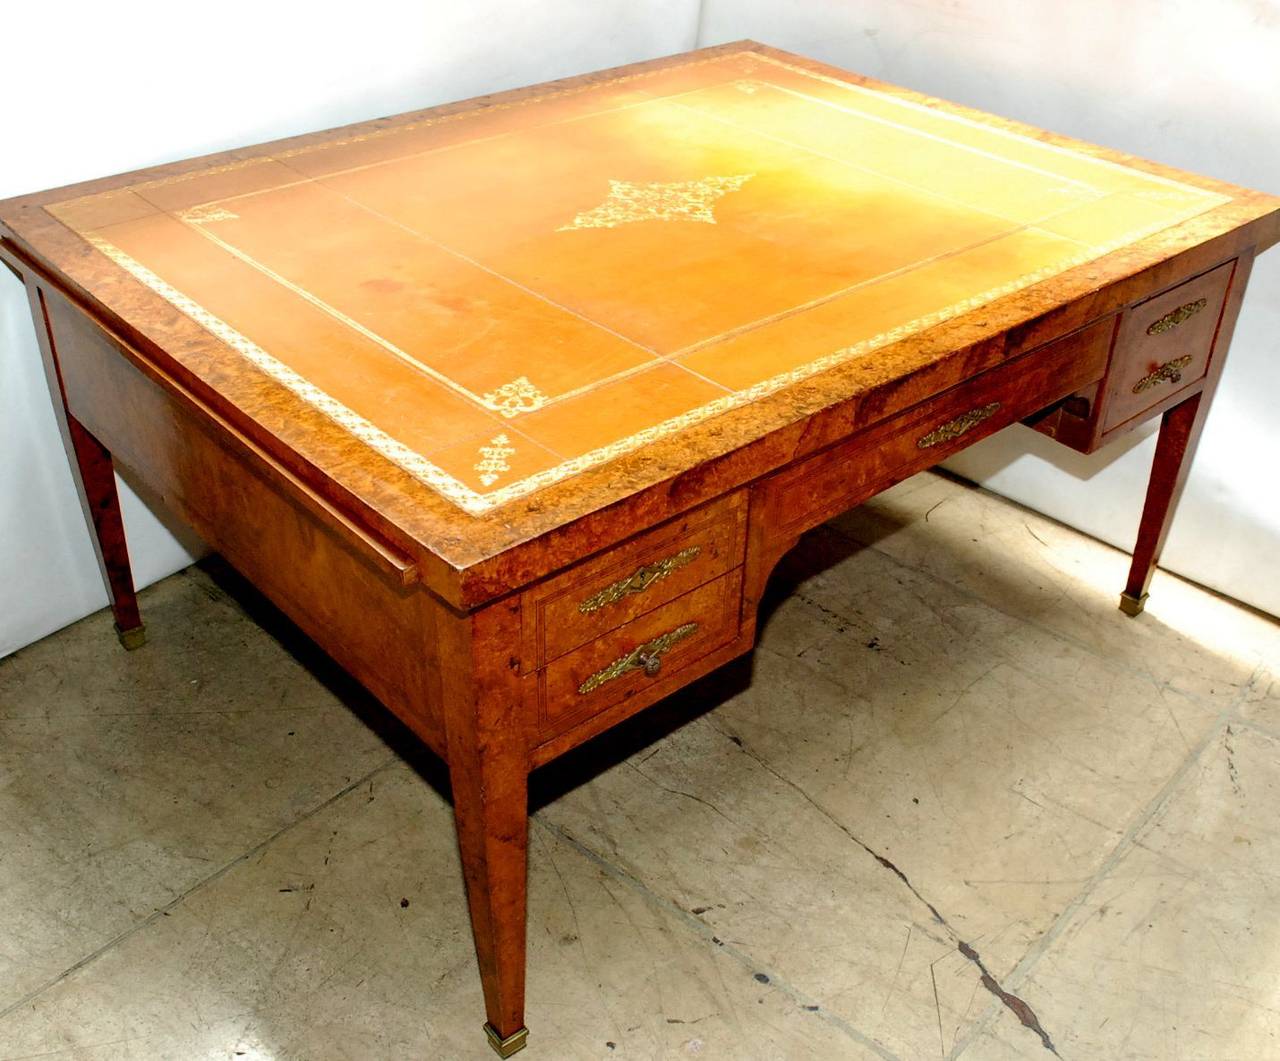 A 19th century French partners desk in the Directoire style.. Desk top and extension slides have a gold tooled leather top. There are five drawers on each side with bronze hardware. Each side has a 15